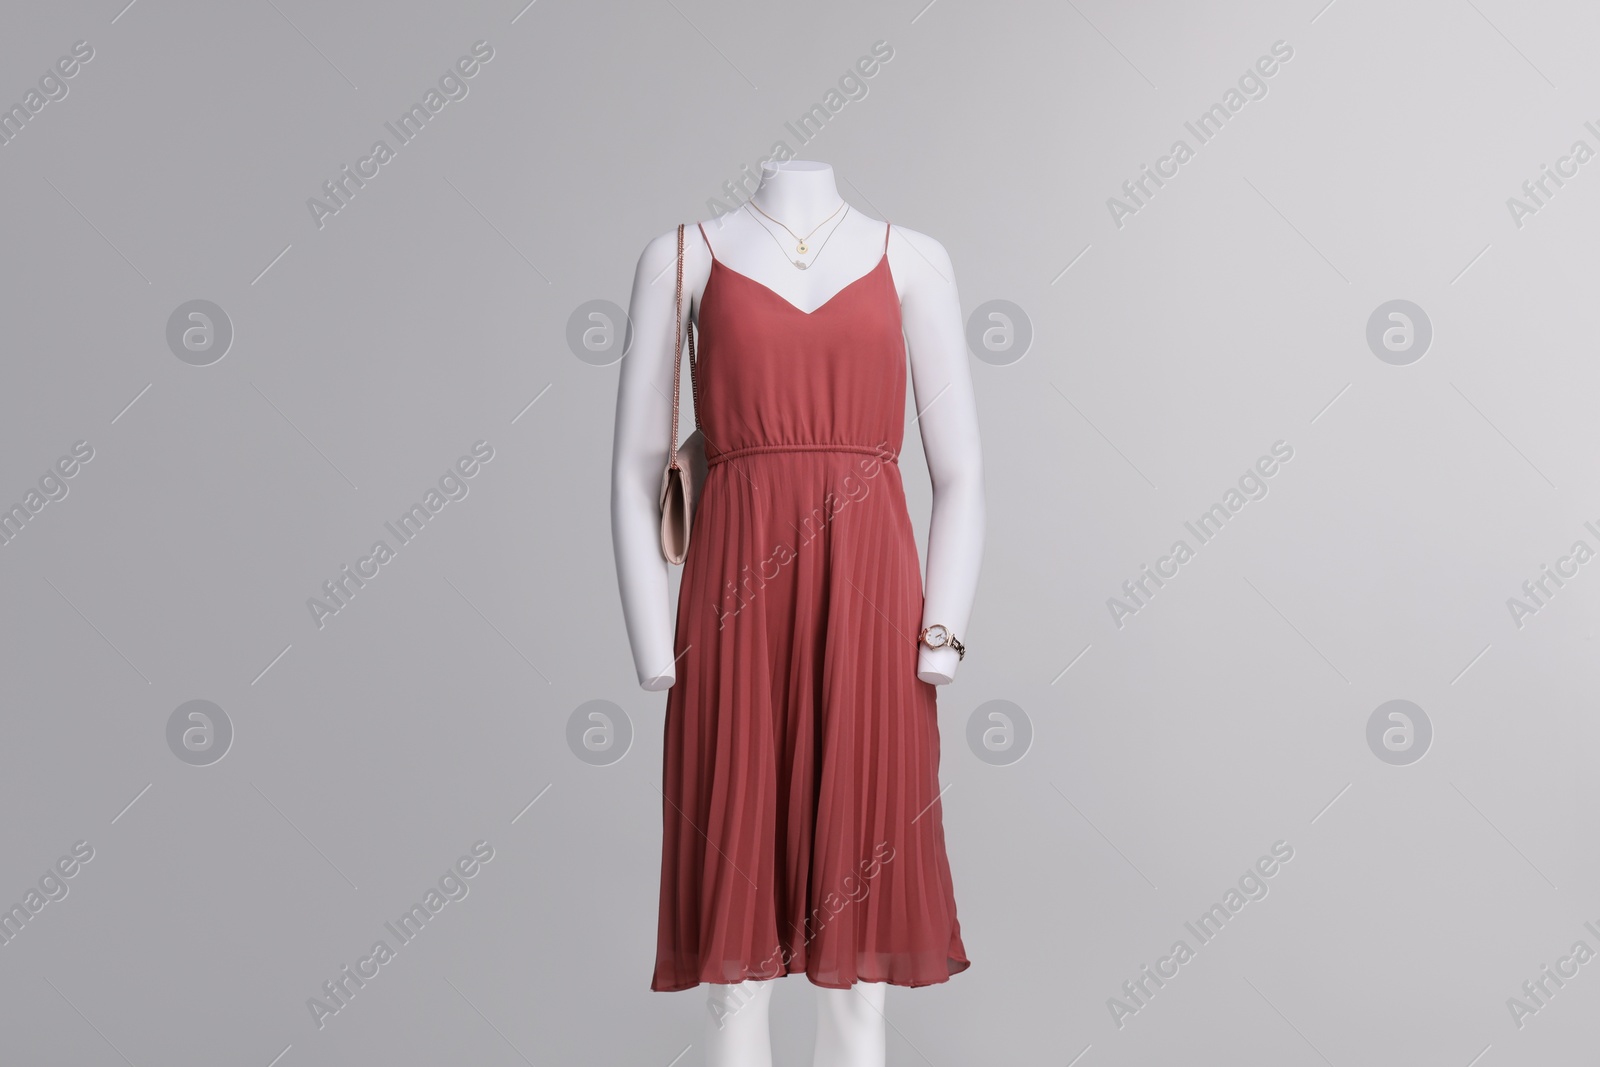 Photo of Female mannequin with necklace and bag dressed in stylish red dress on grey background